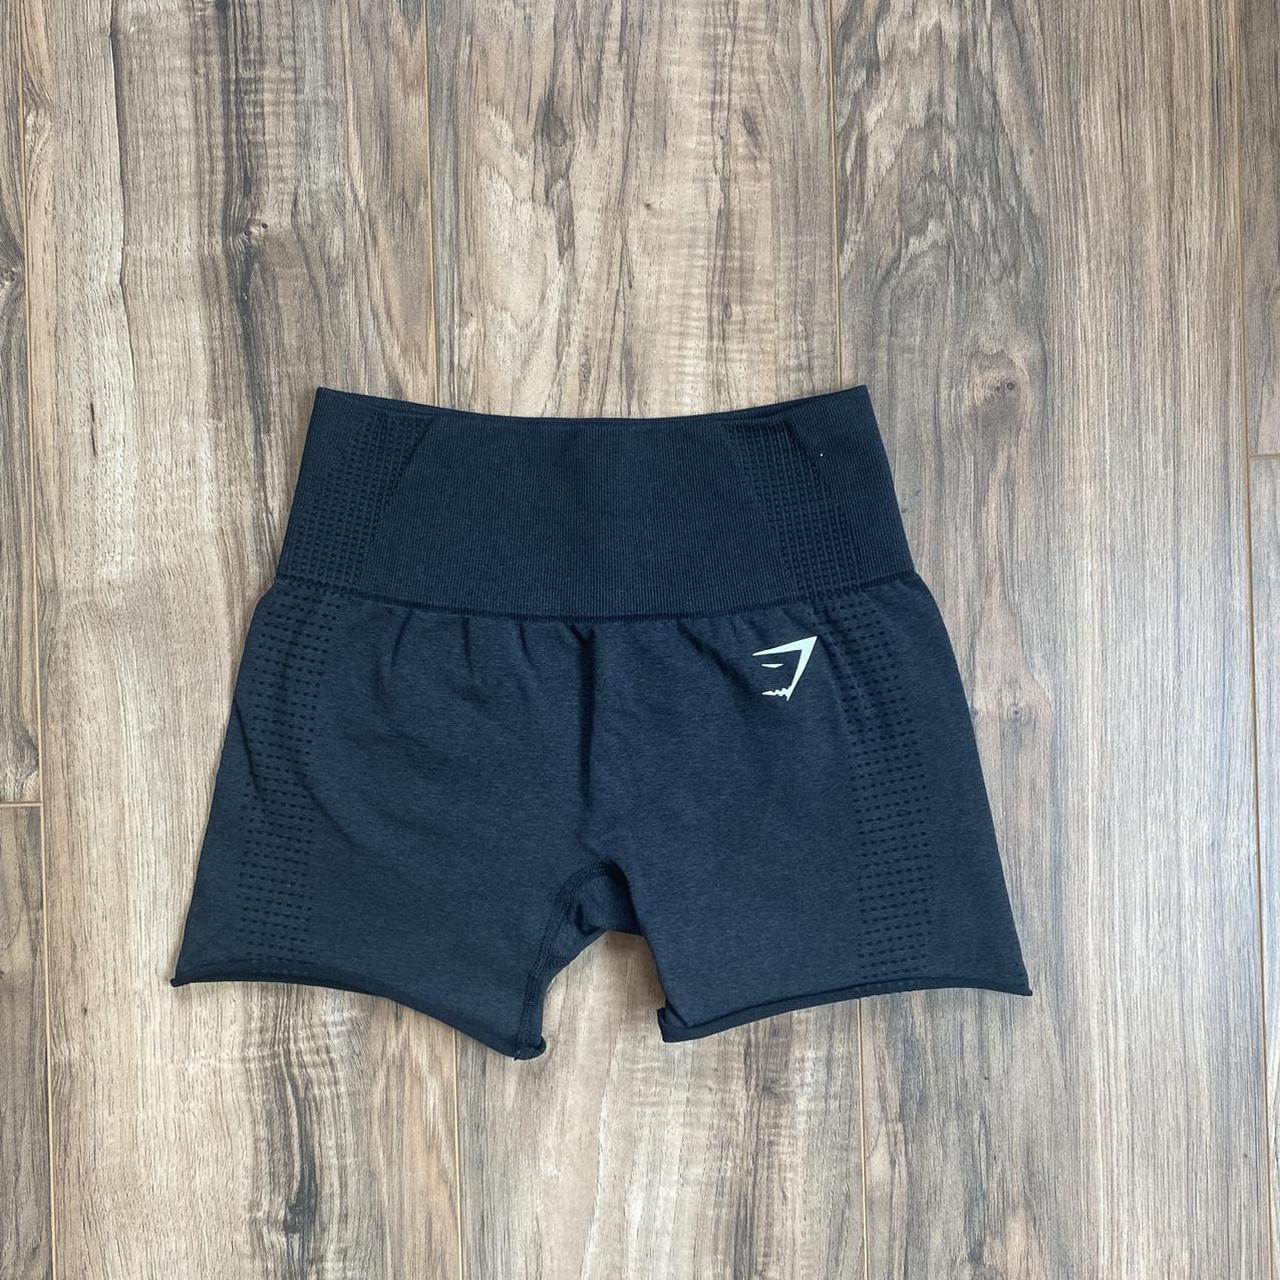 Gymshark black seamless shorts size small cut by me - Depop